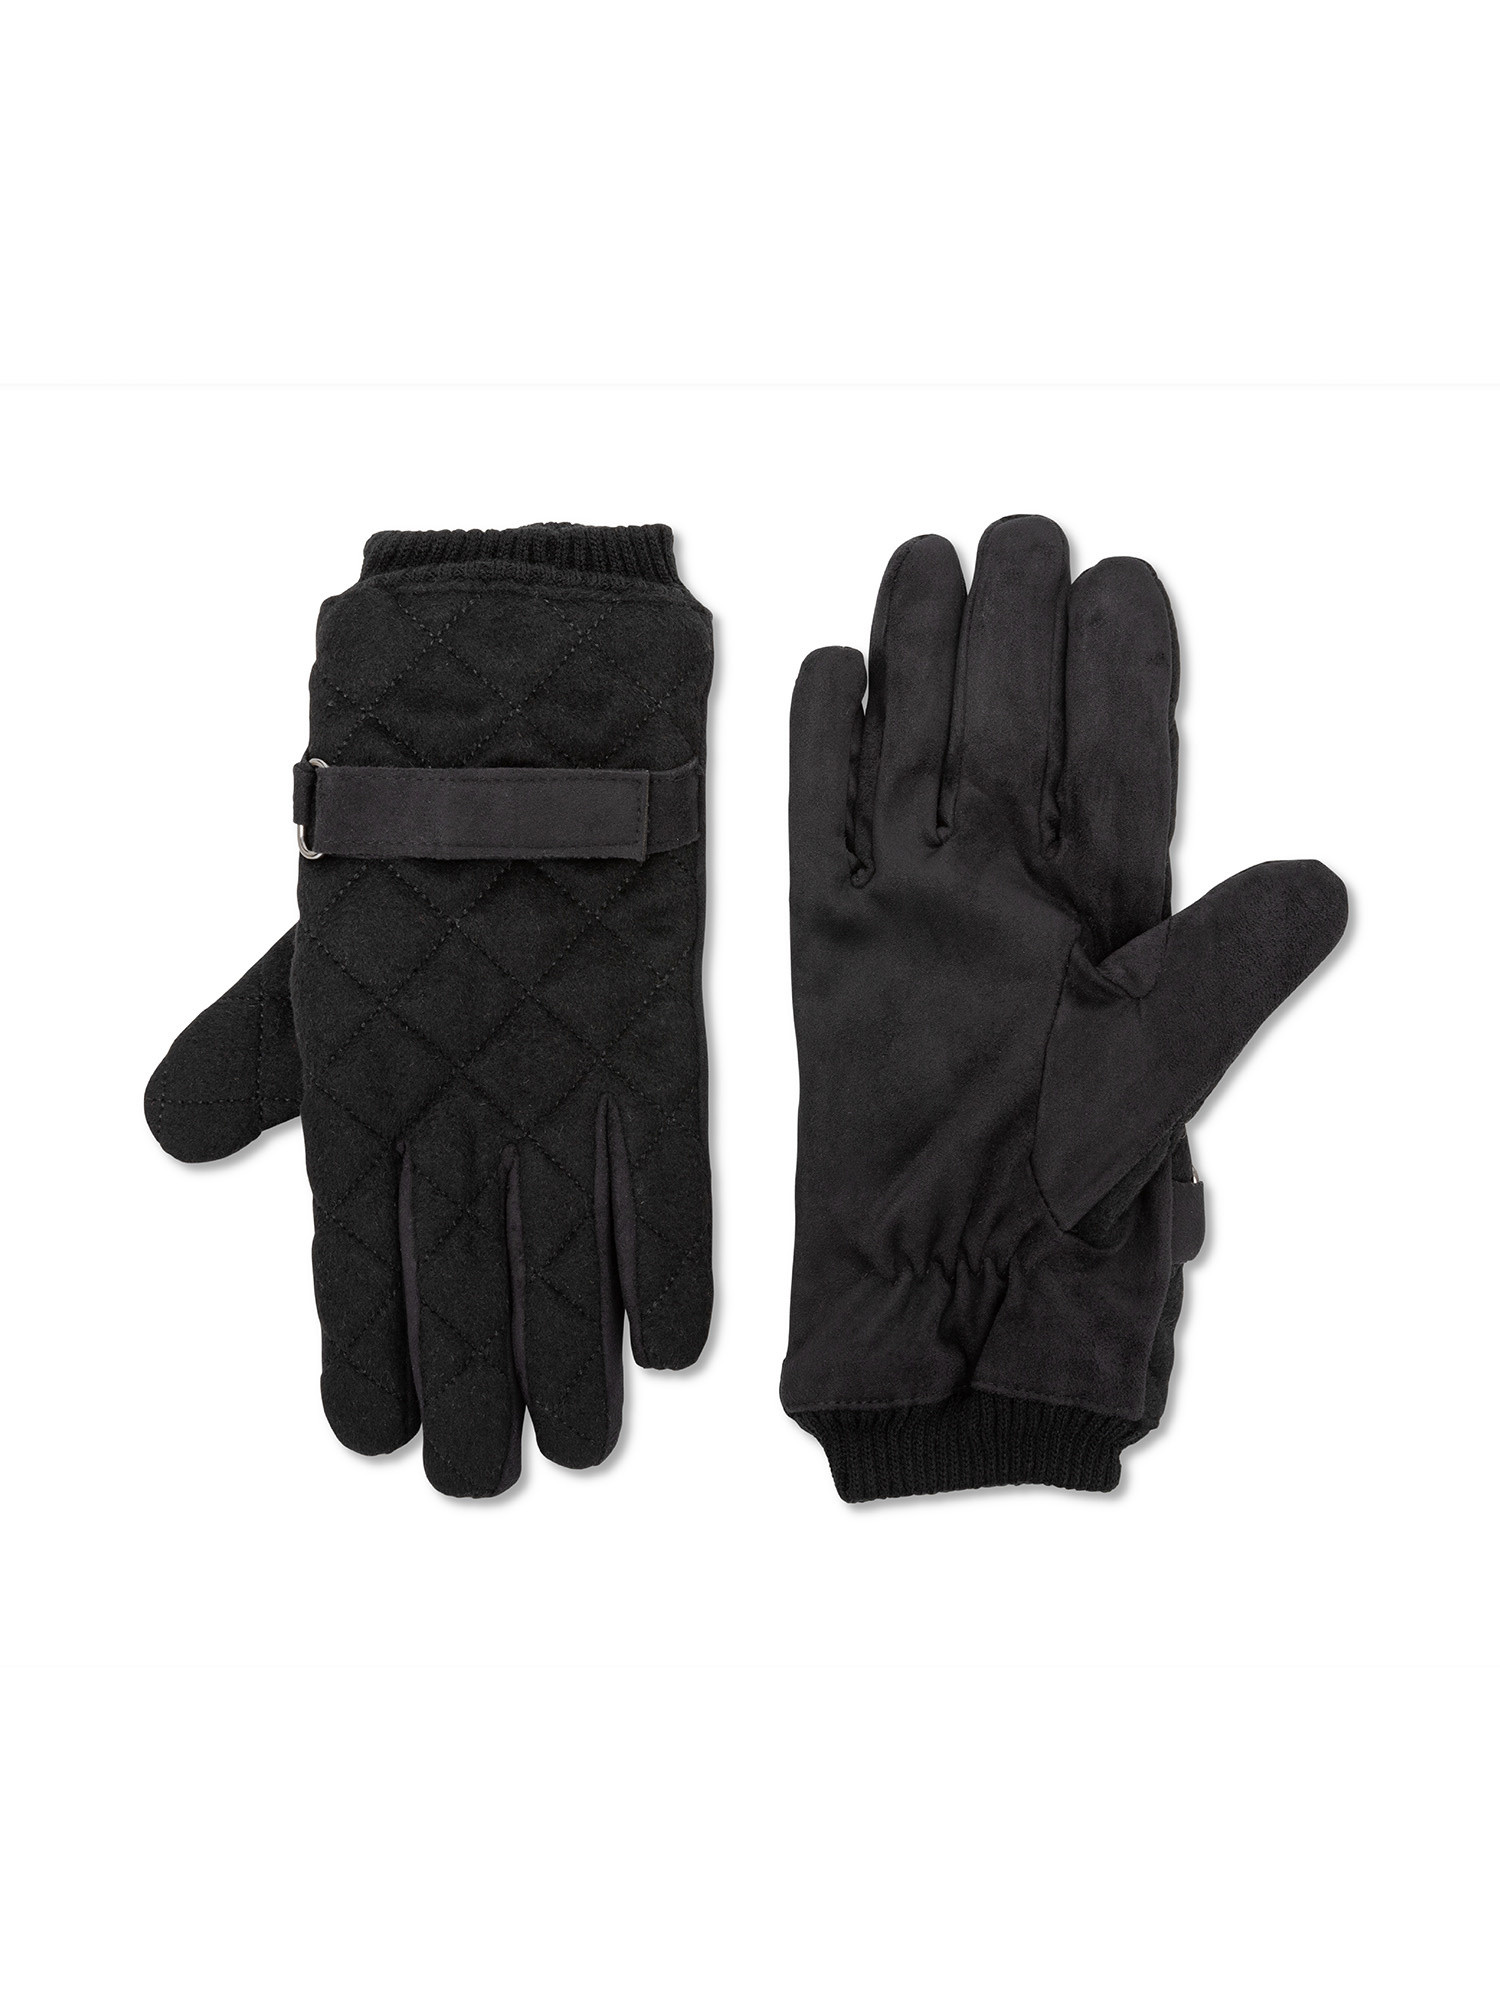 Luca D'Altieri - Quilted suede gloves, Black, large image number 0